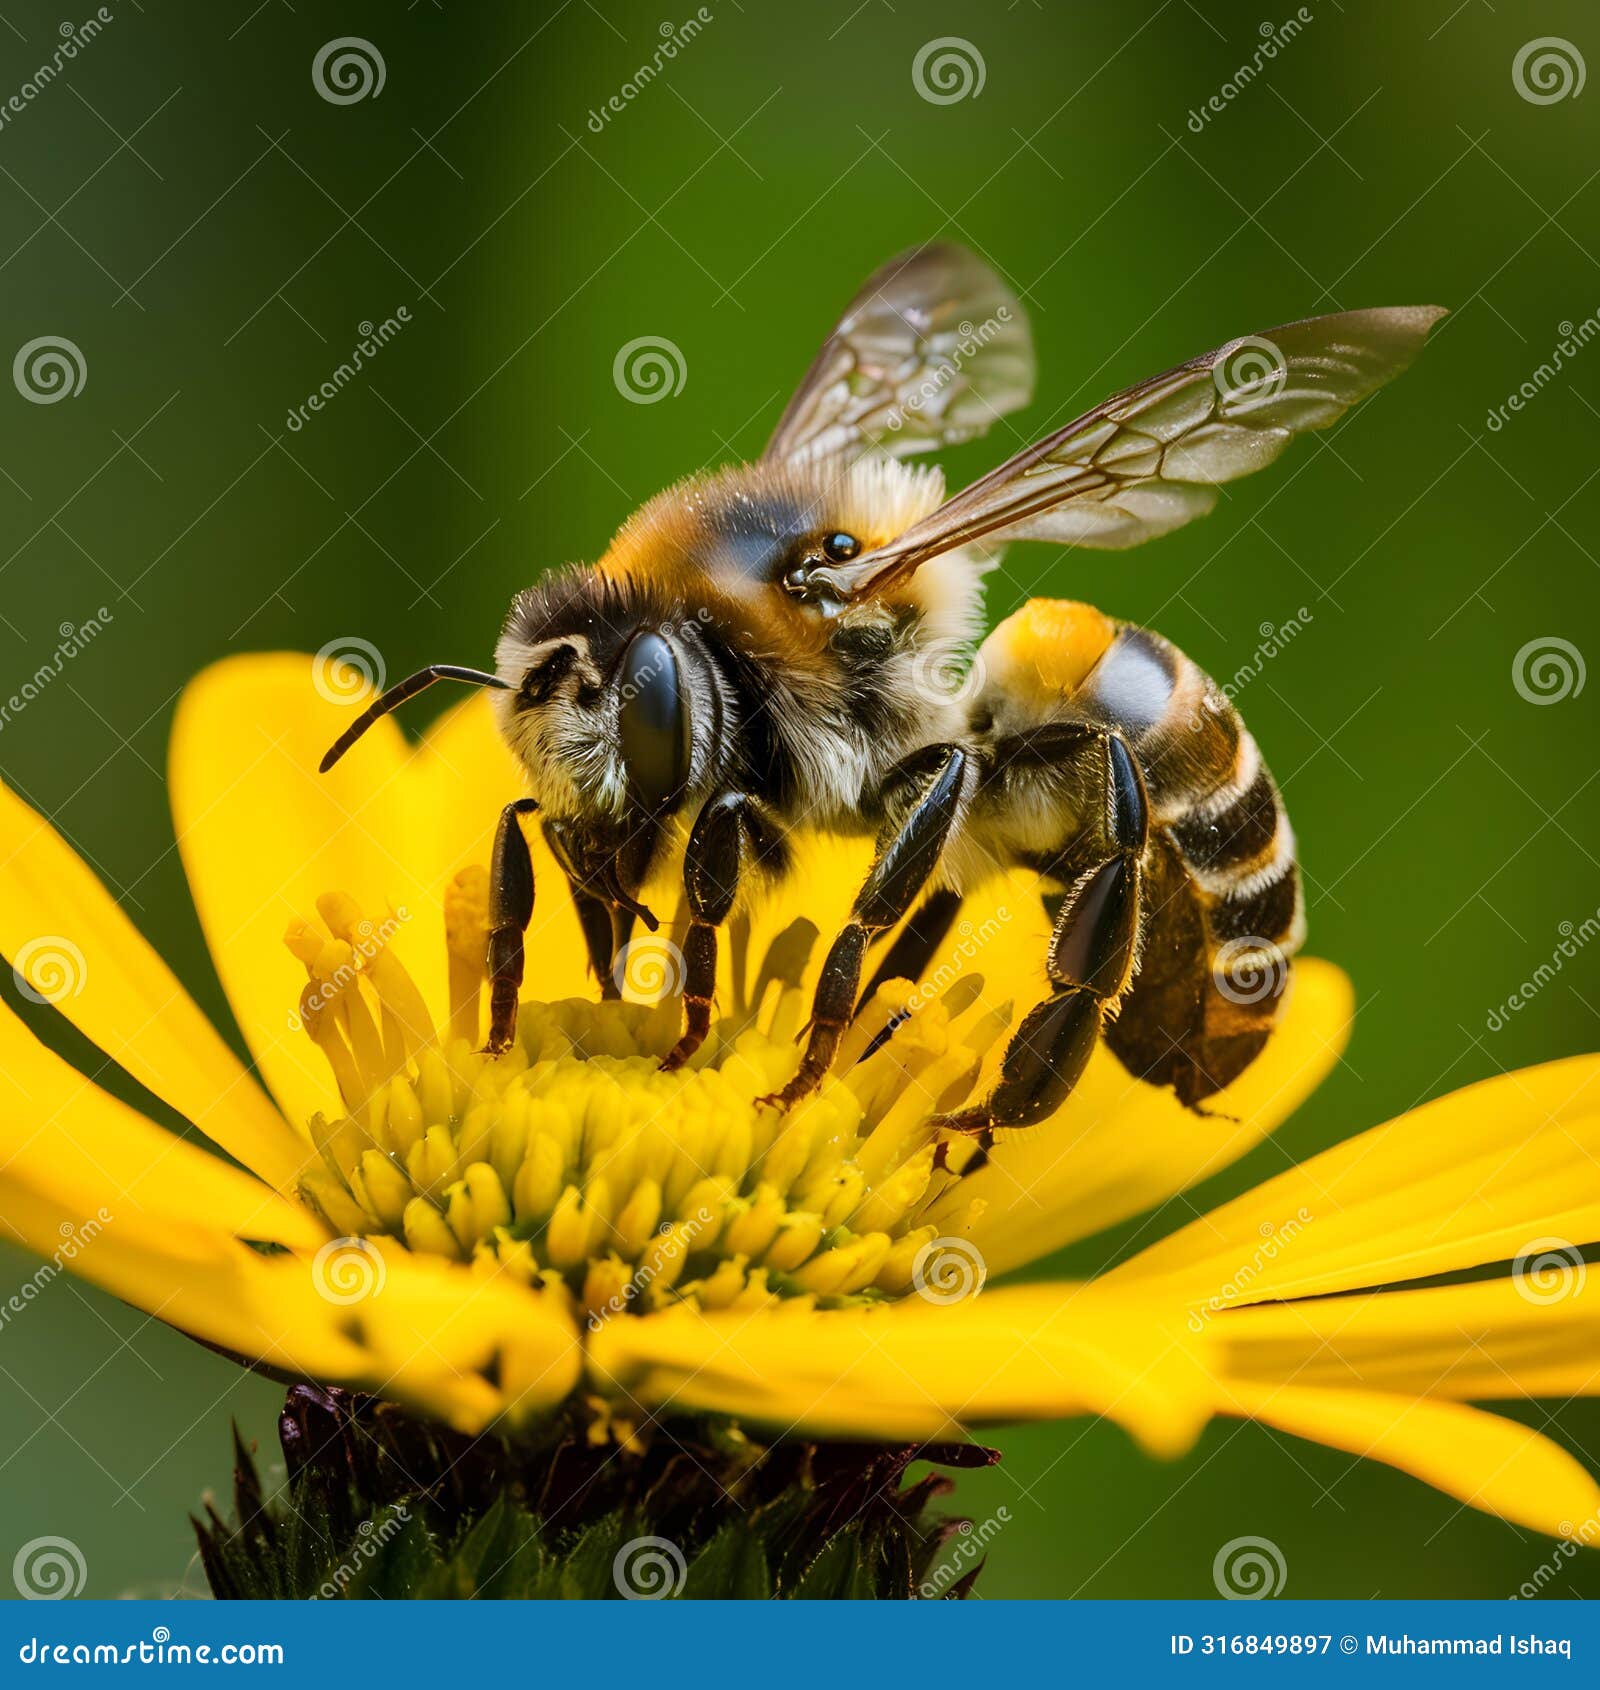 pic busy honey bee diligently pollinates flower petal in close up shot